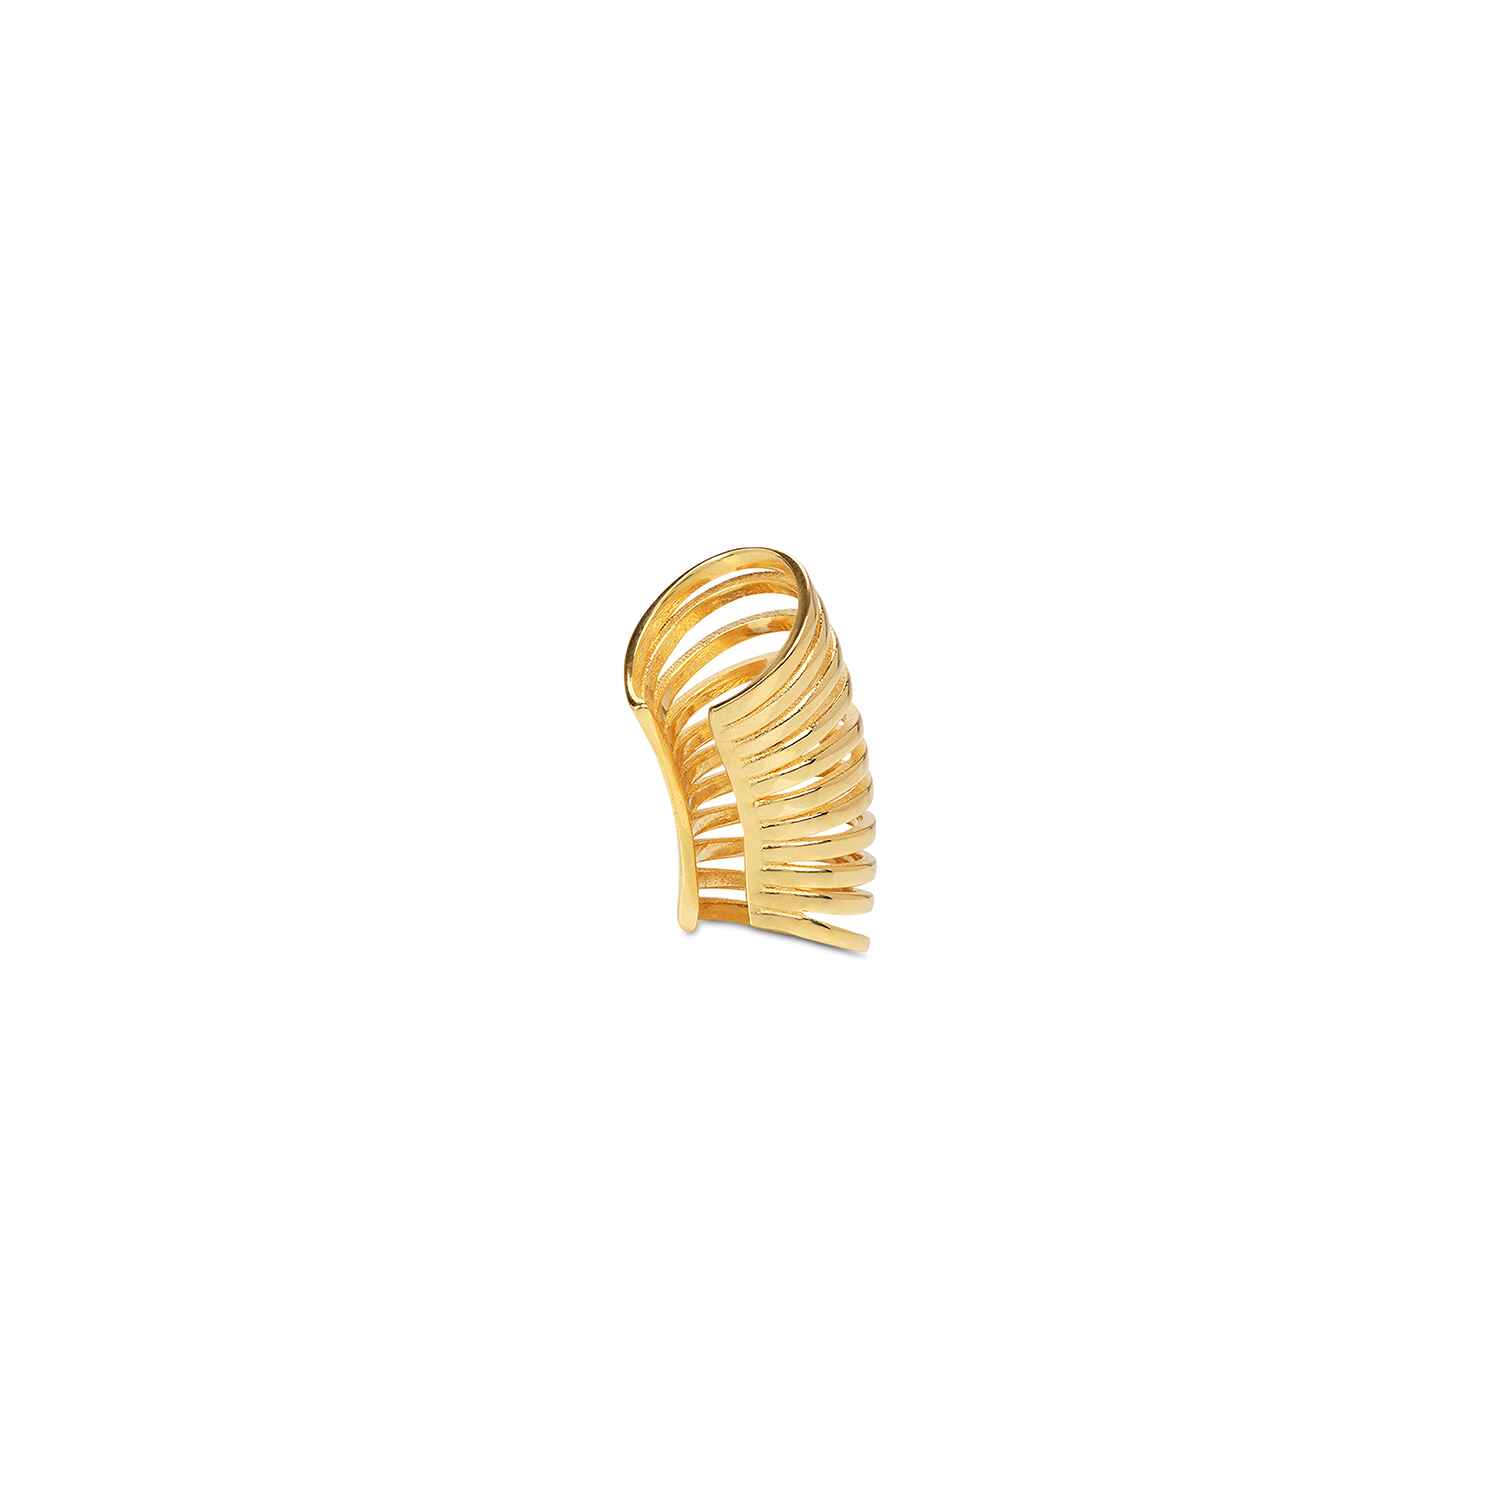 Upgrade your ear stack, with or without piercings. In a multi hoop-shaped design, the sustainably sourced Loli Gold Ear Cuff makes the ultimate sleek statement. Simply cuff it on your earlobe and slide from the bottom up for the perfect fit.